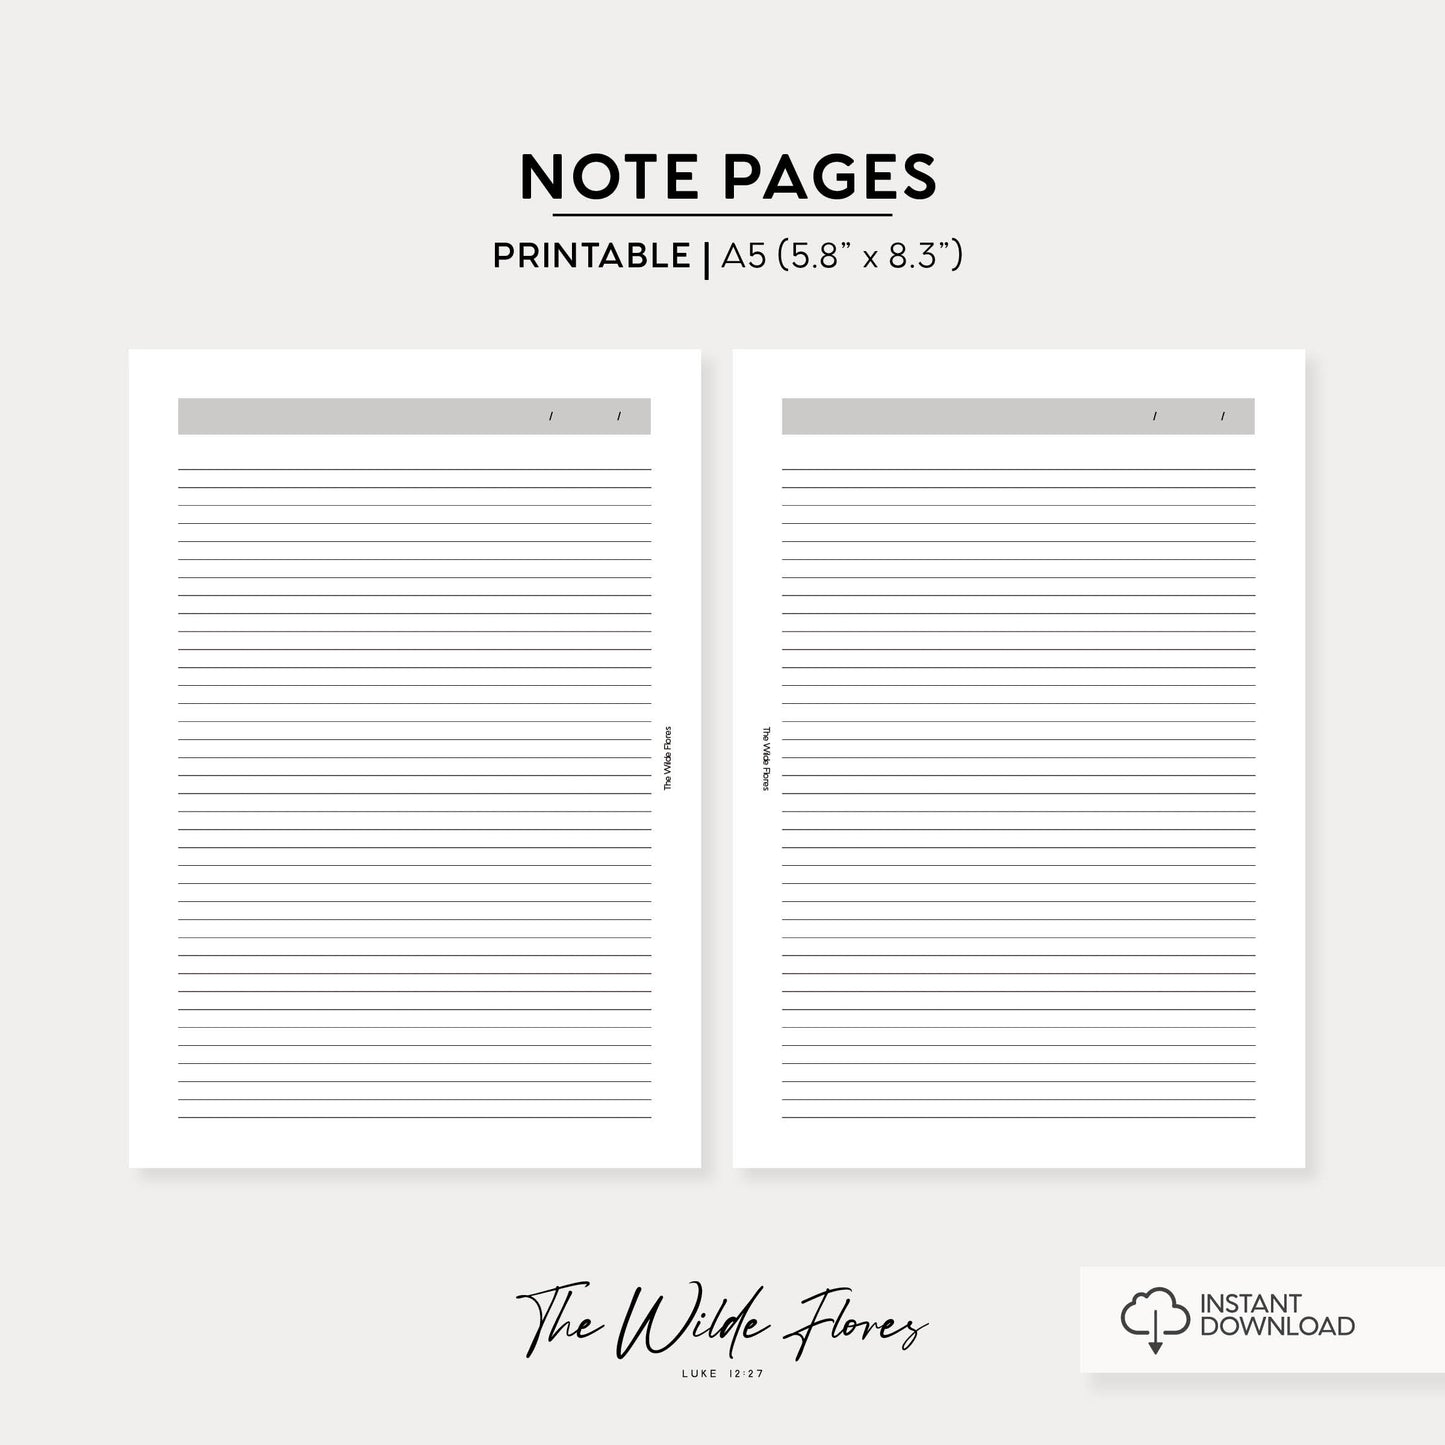 Lined Note Pages: A5 Size Printable